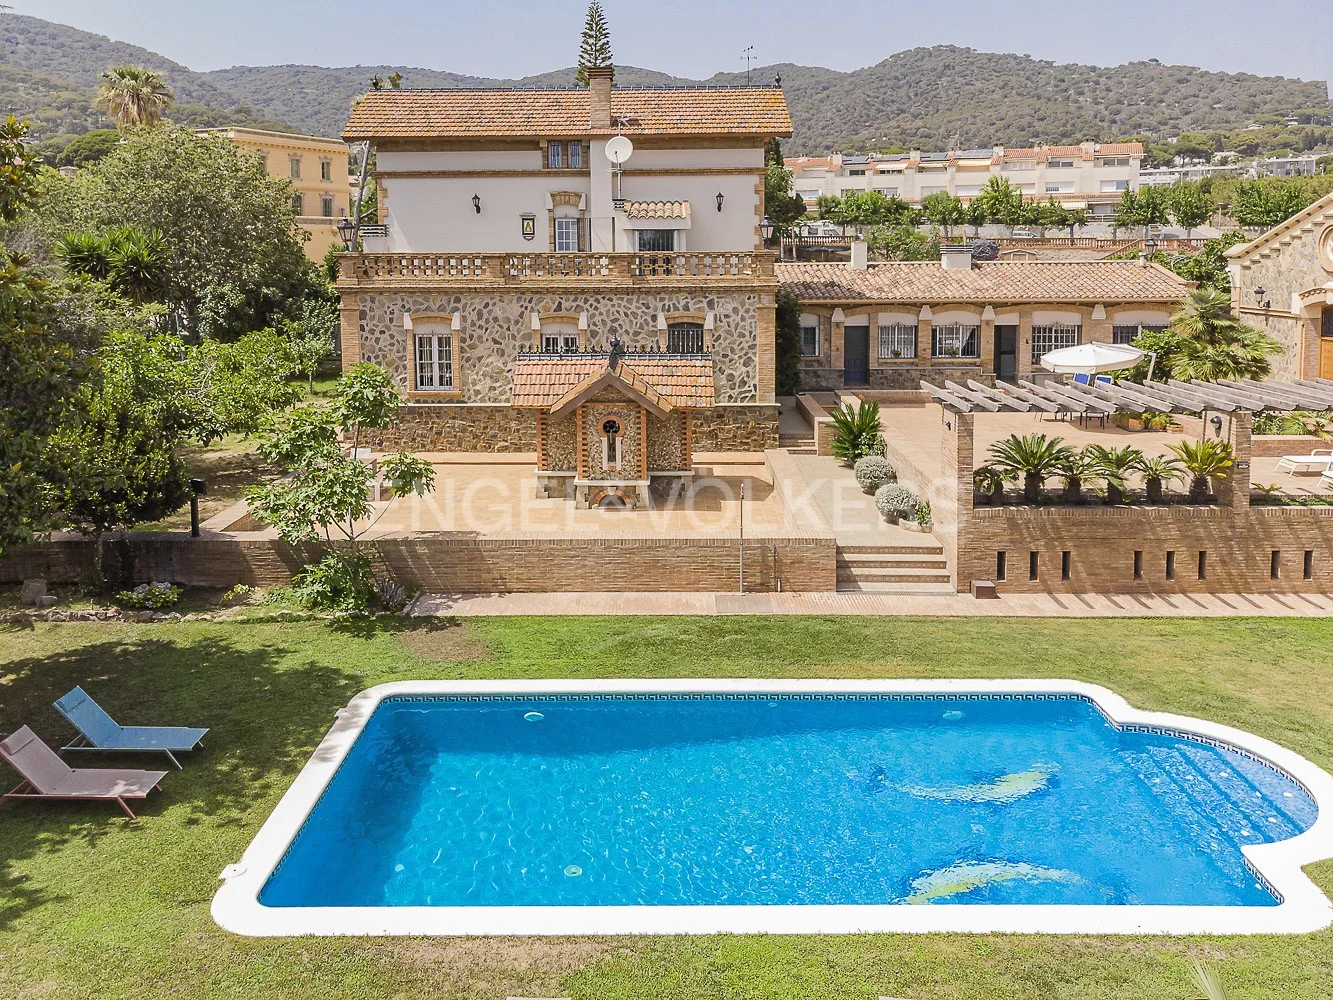 Spectacular villa from 1900 completely restored